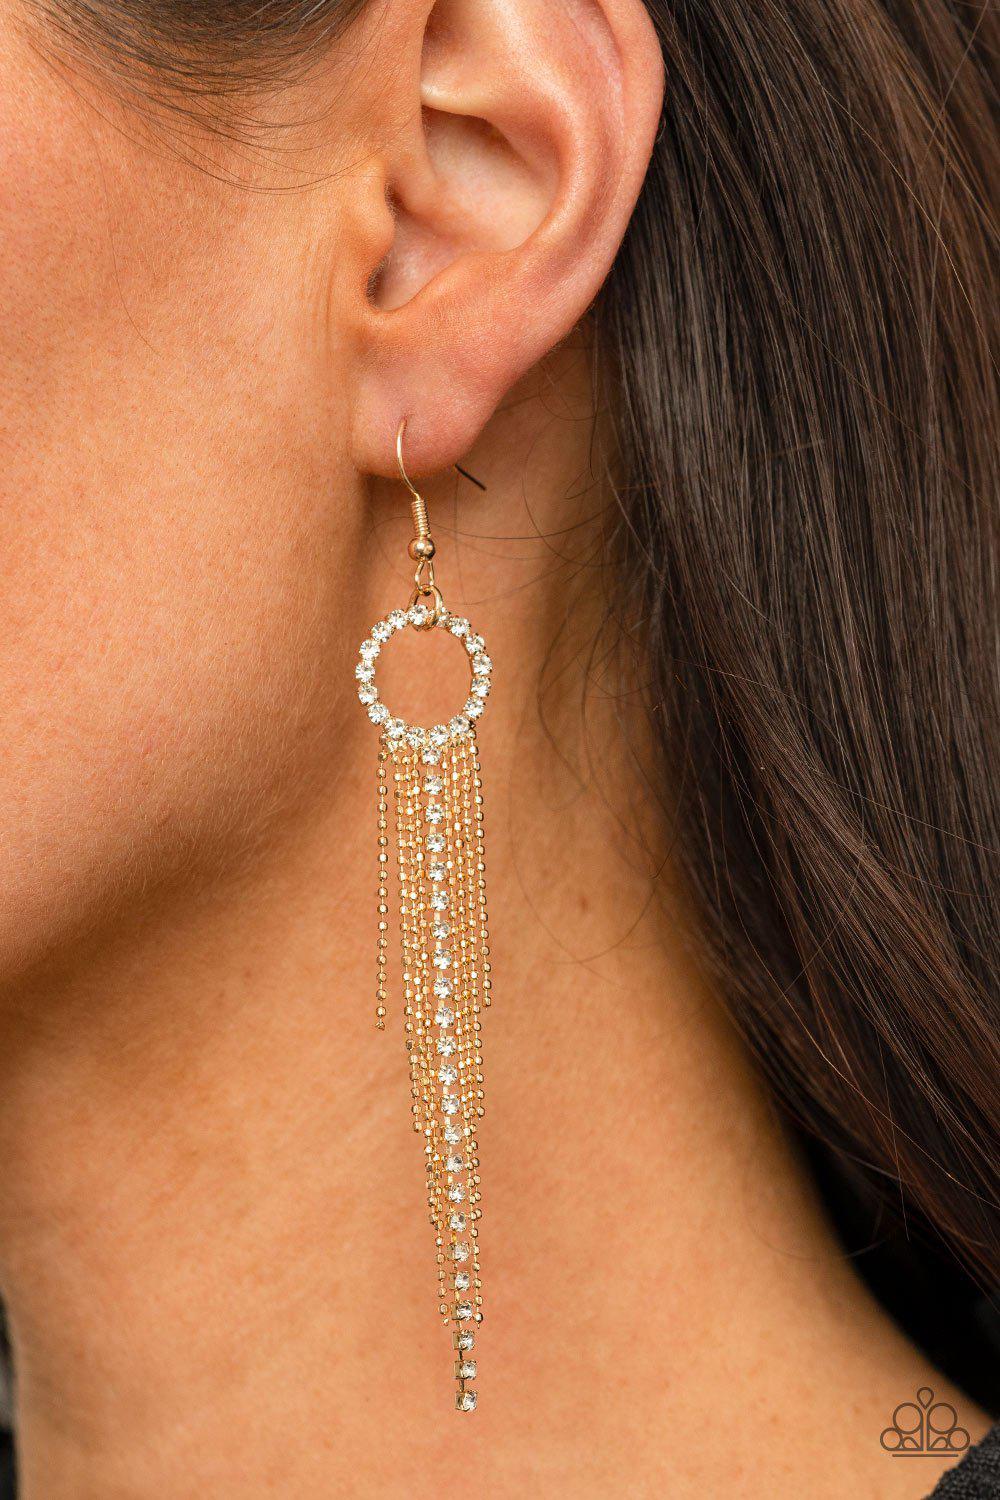 Pass The Glitter Gold and White Rhinestone Earrings - Paparazzi Accessories- model - CarasShop.com - $5 Jewelry by Cara Jewels